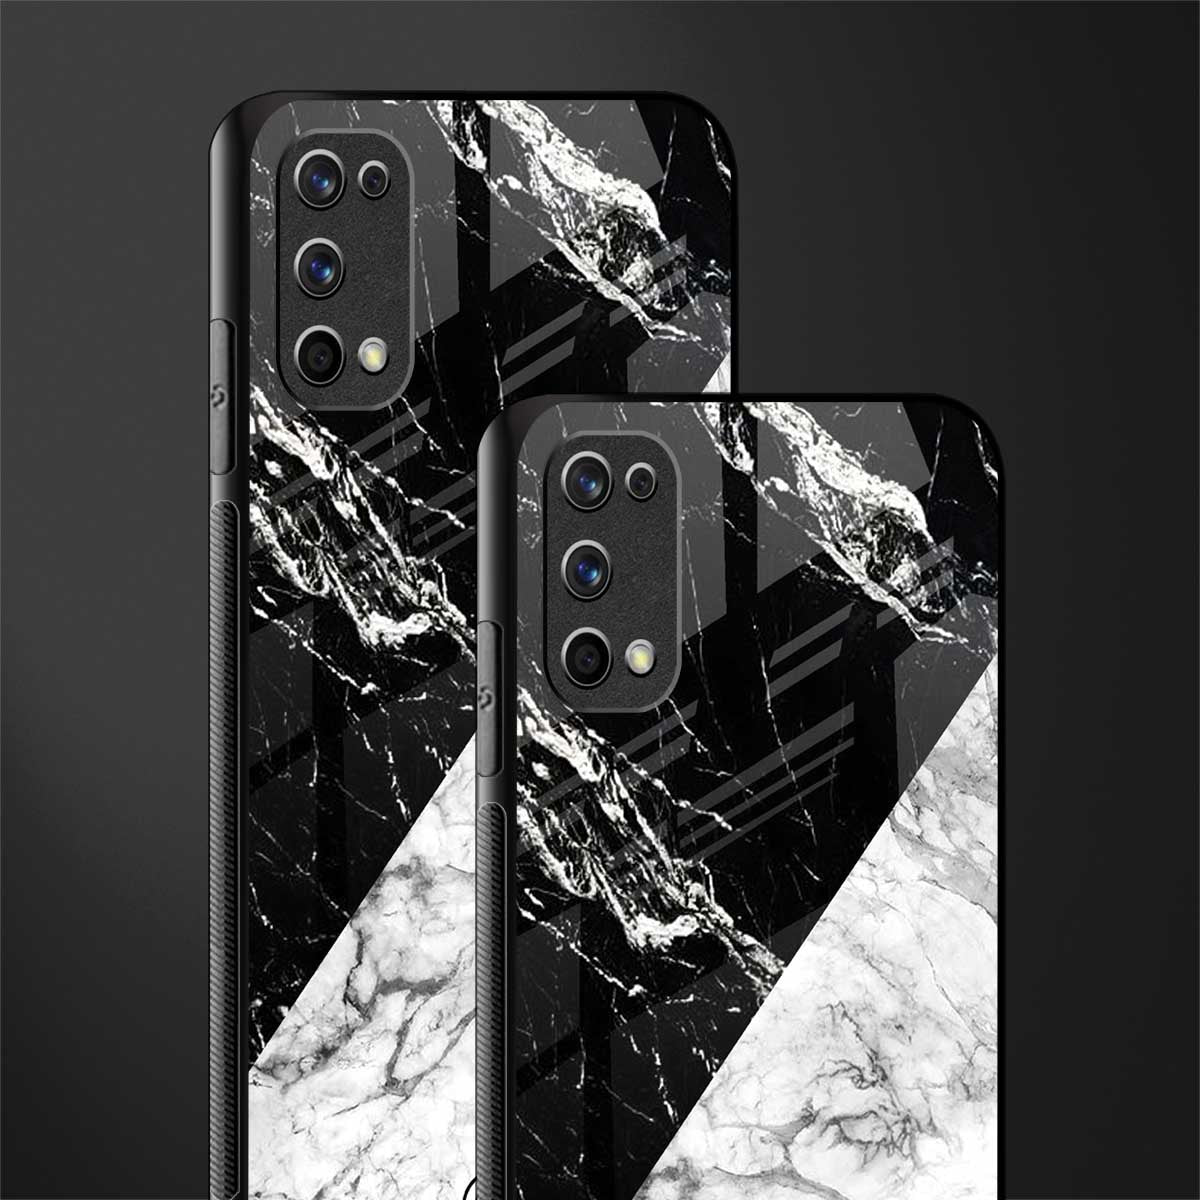 fatal contradiction phone cover for realme 7 pro